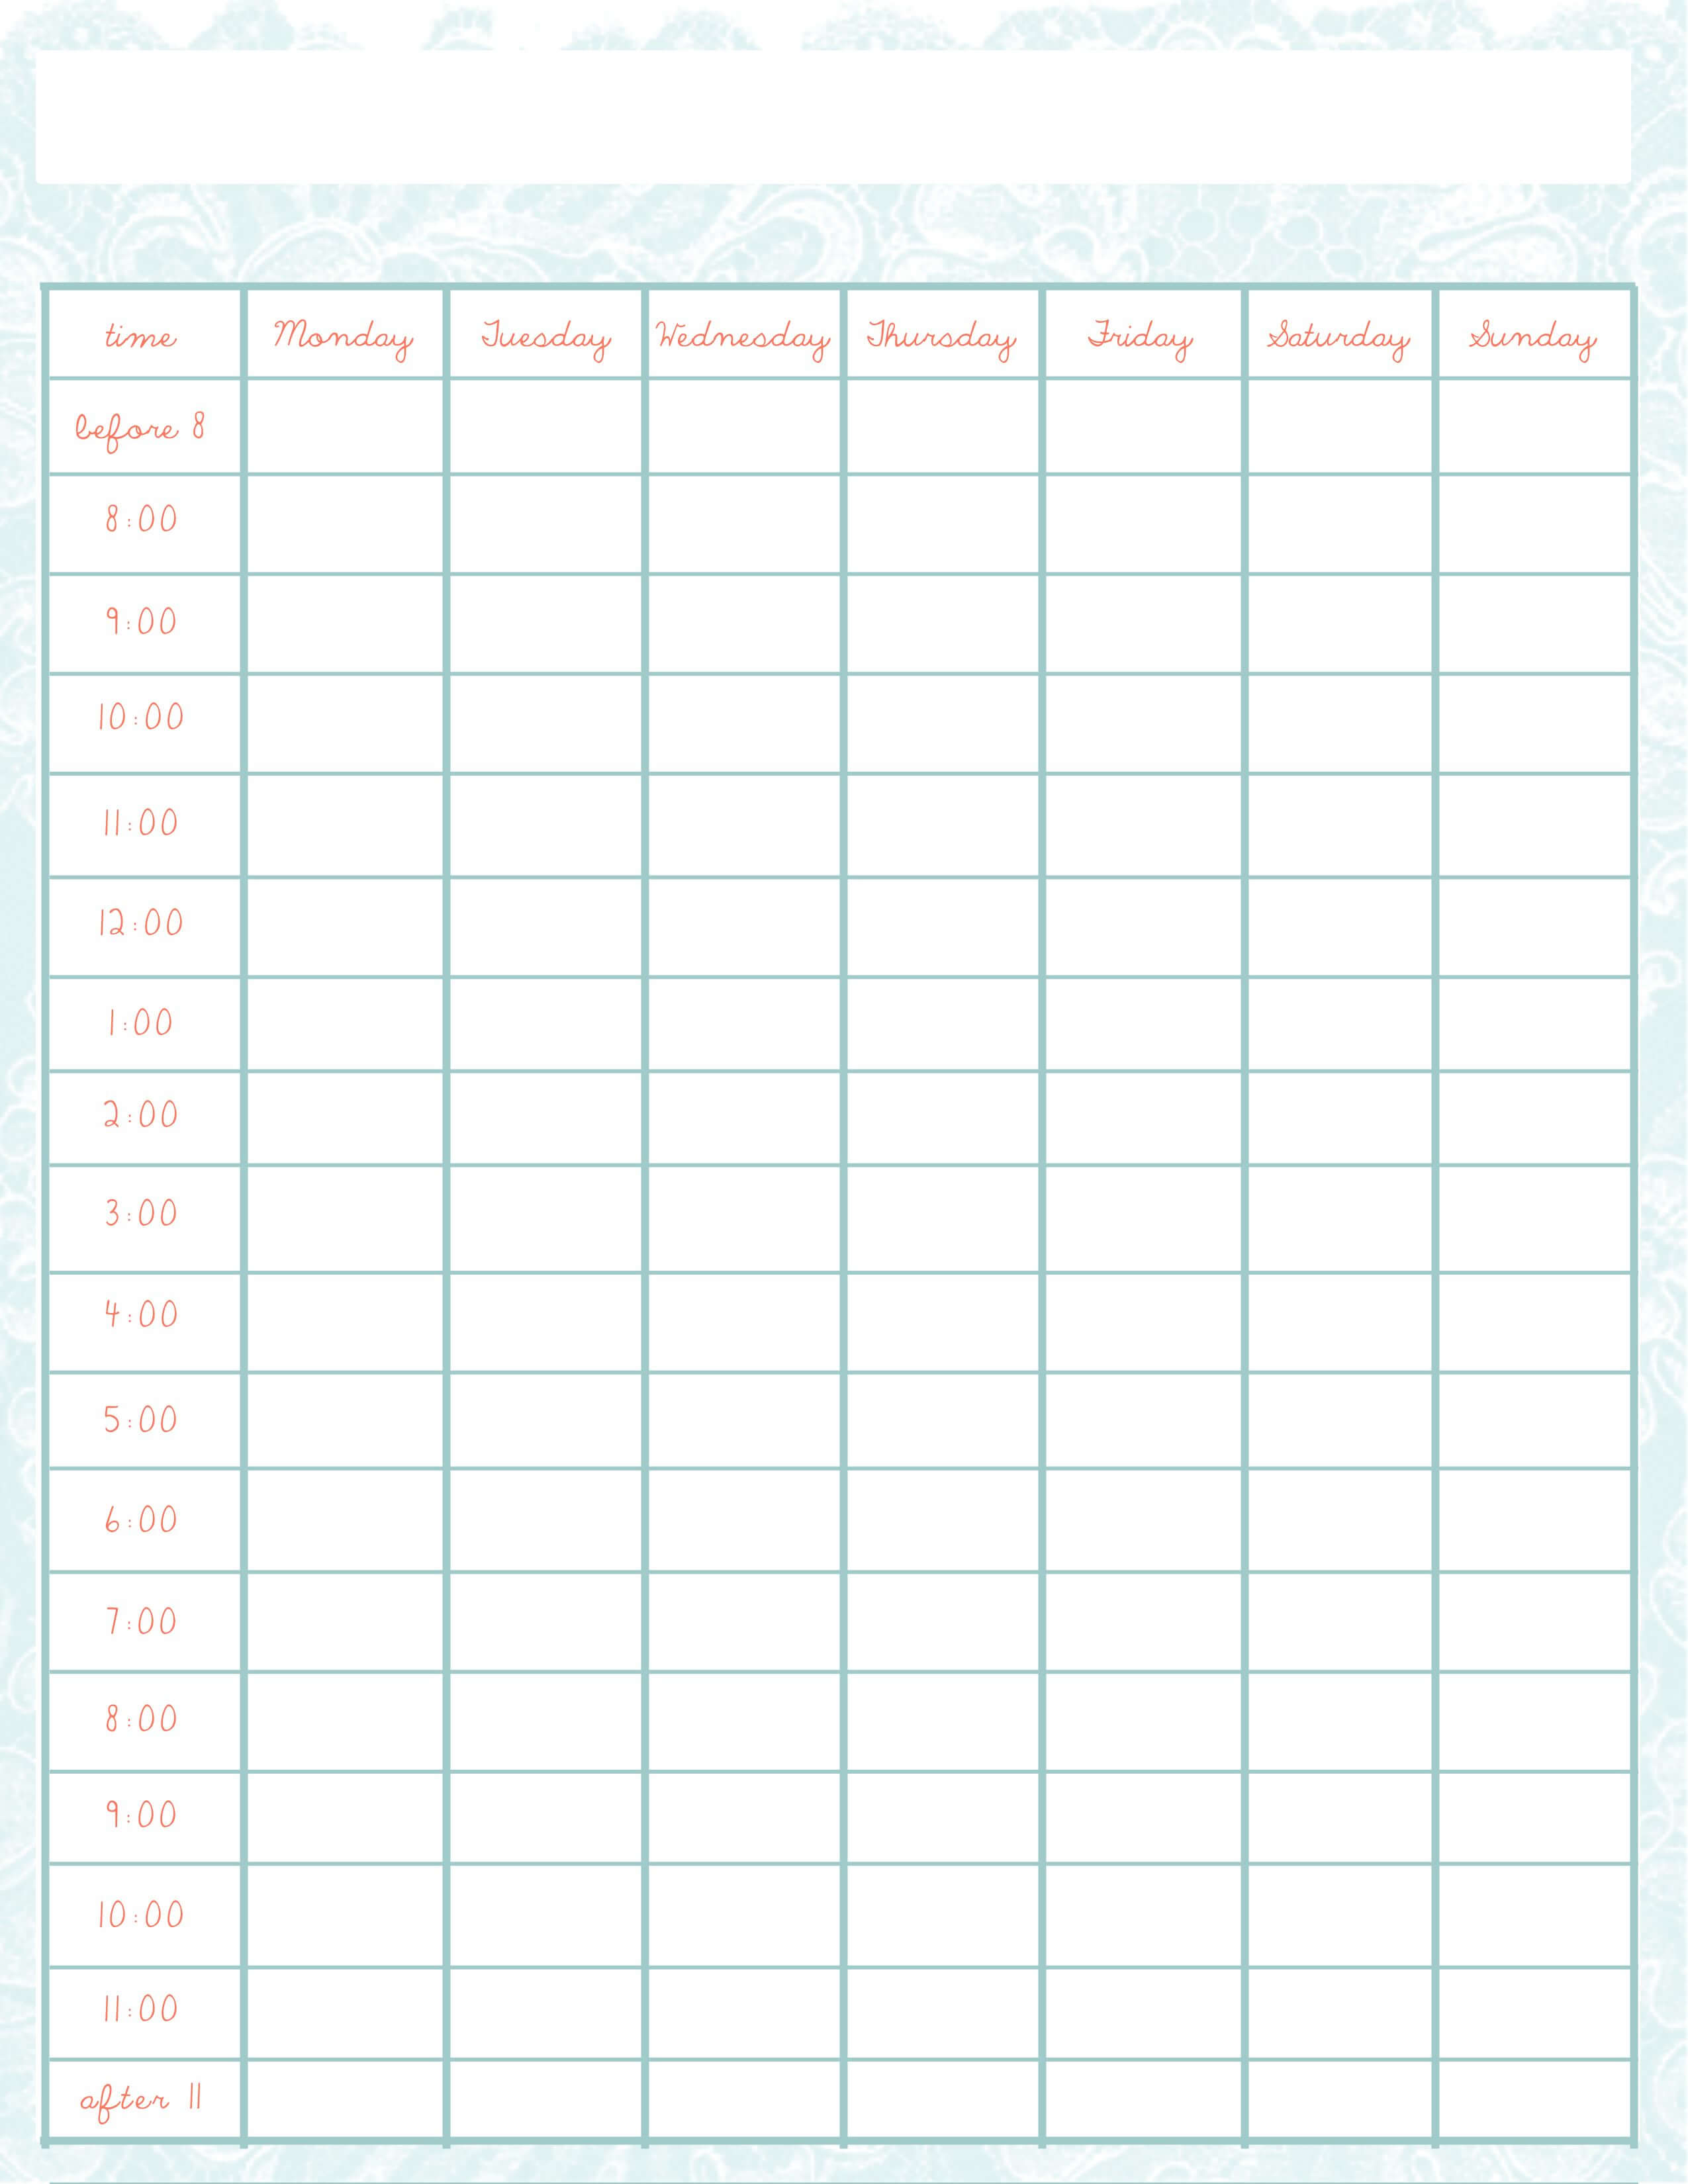 Pindonna Garbett On Organization | Daily Schedule Pertaining To Blank Revision Timetable Template